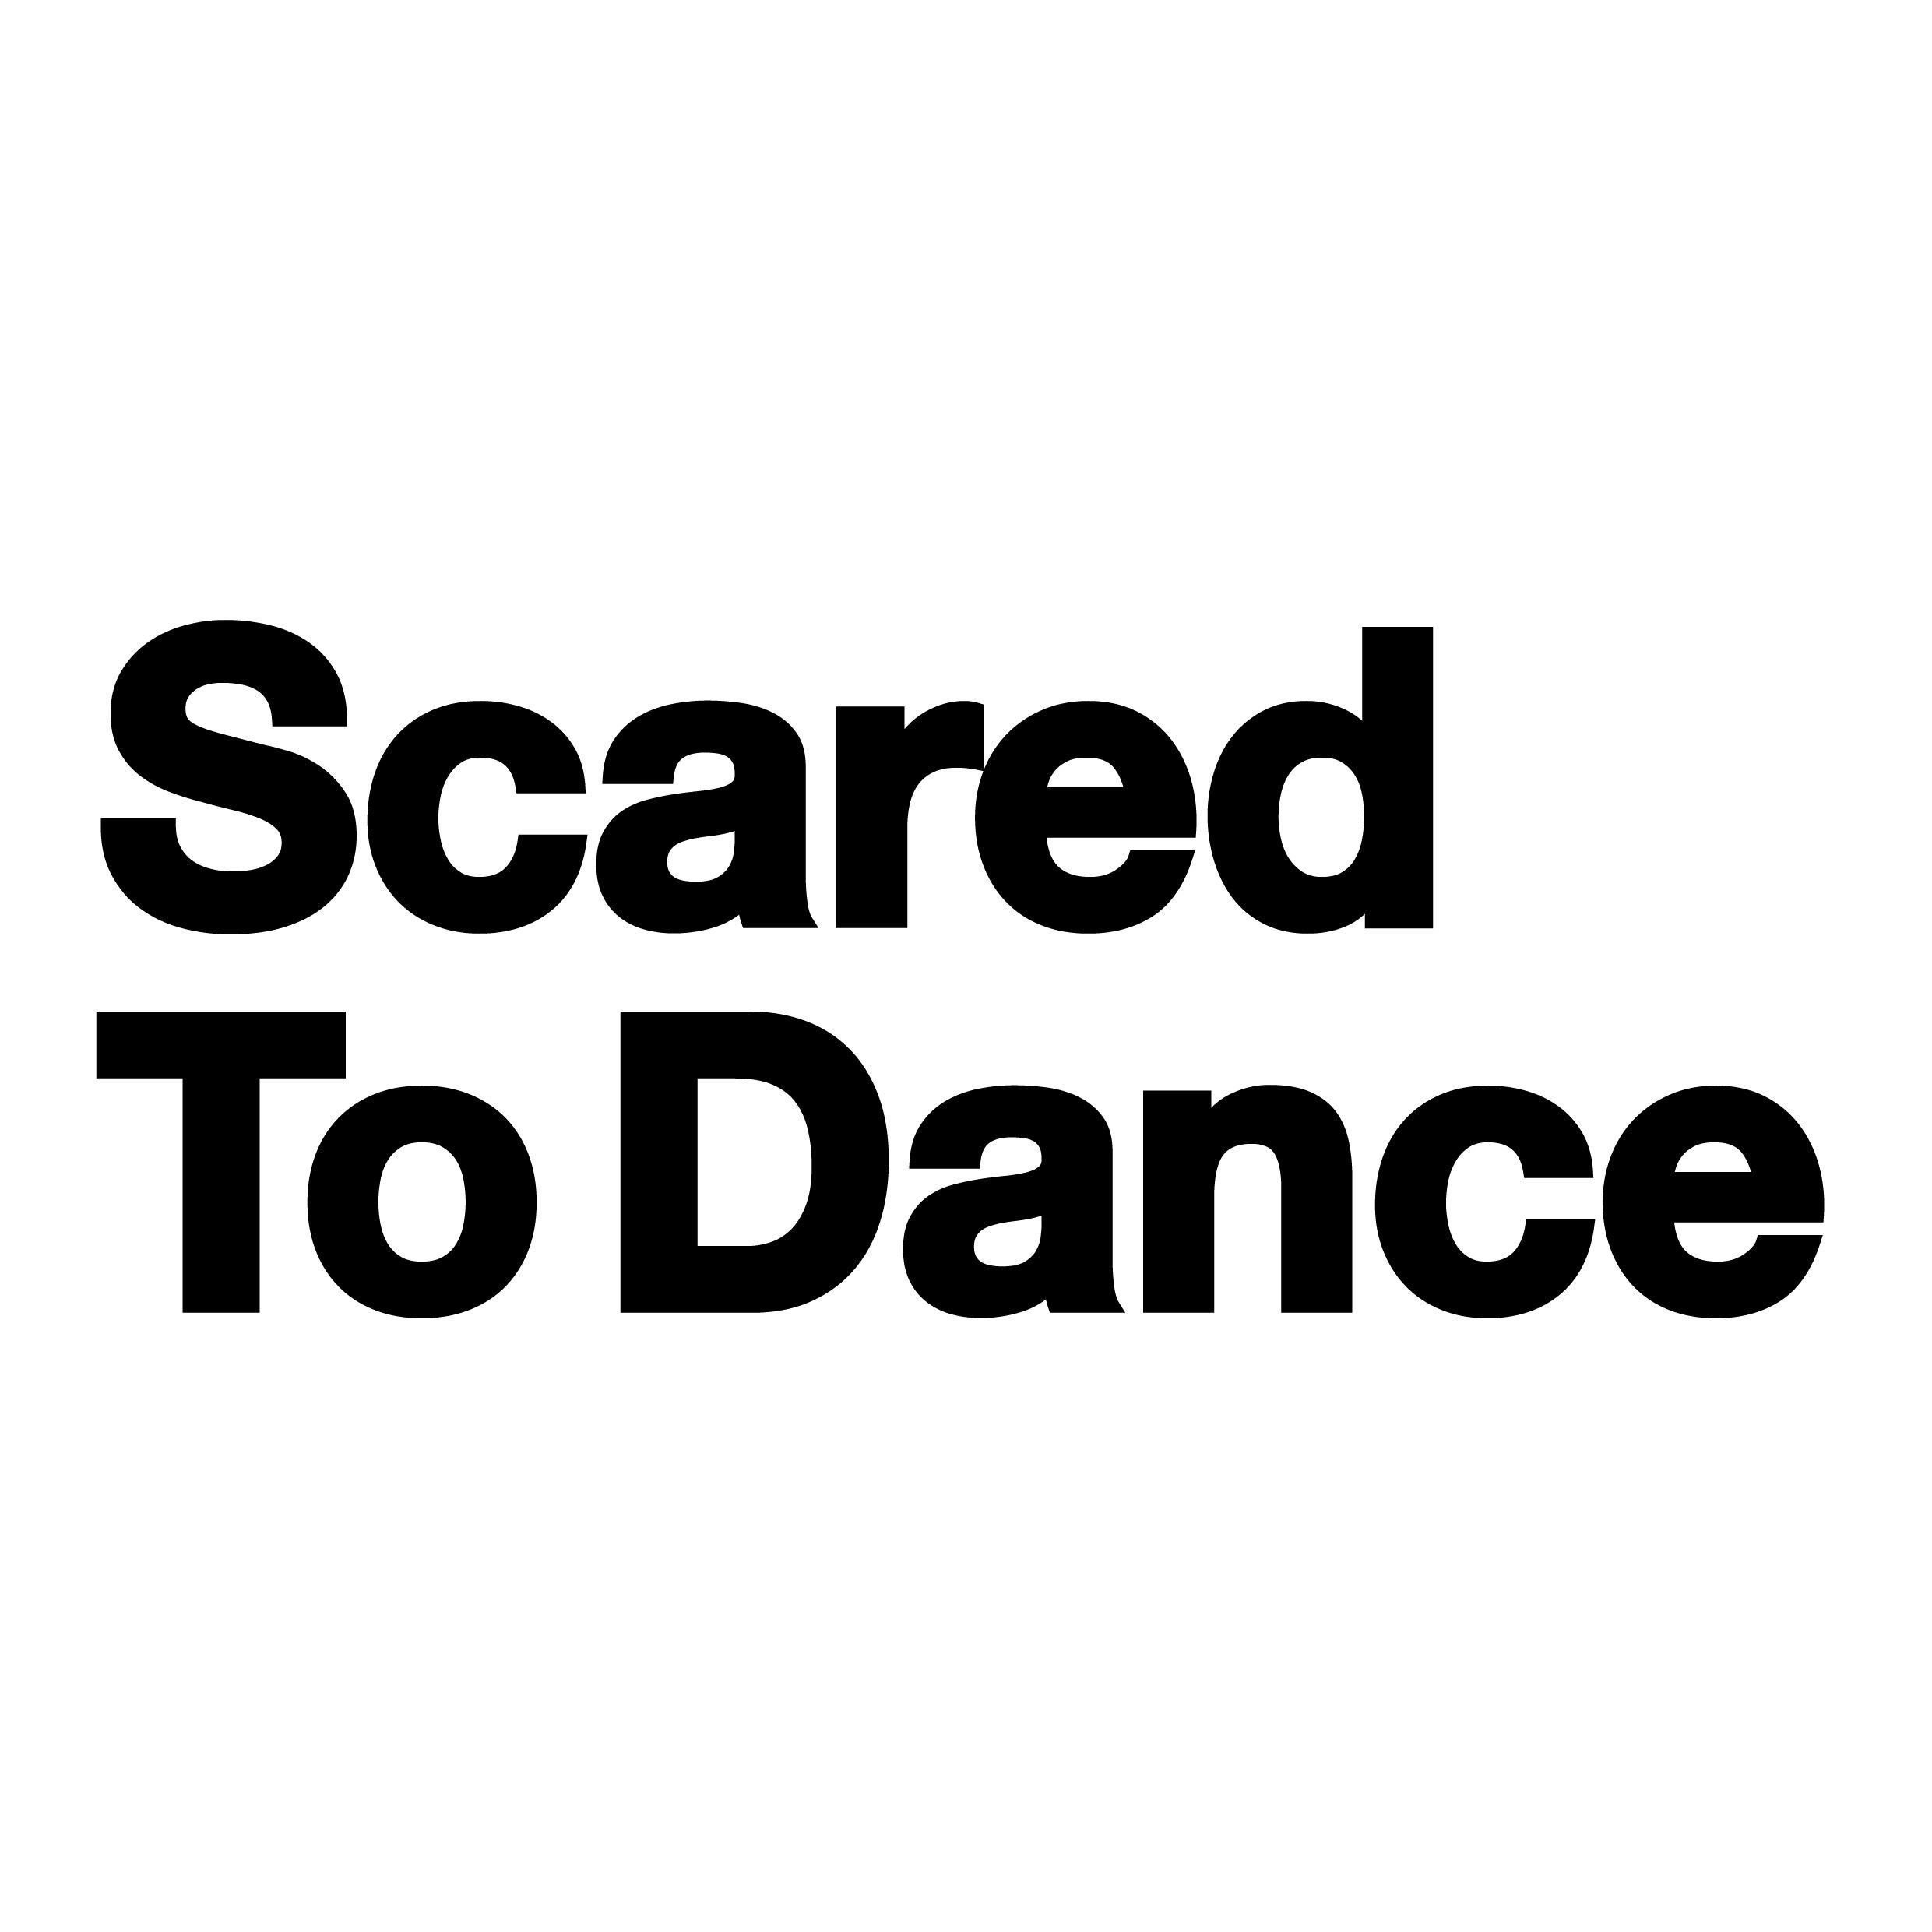 Get Scared Logo - CONTACT – Scared To Dance